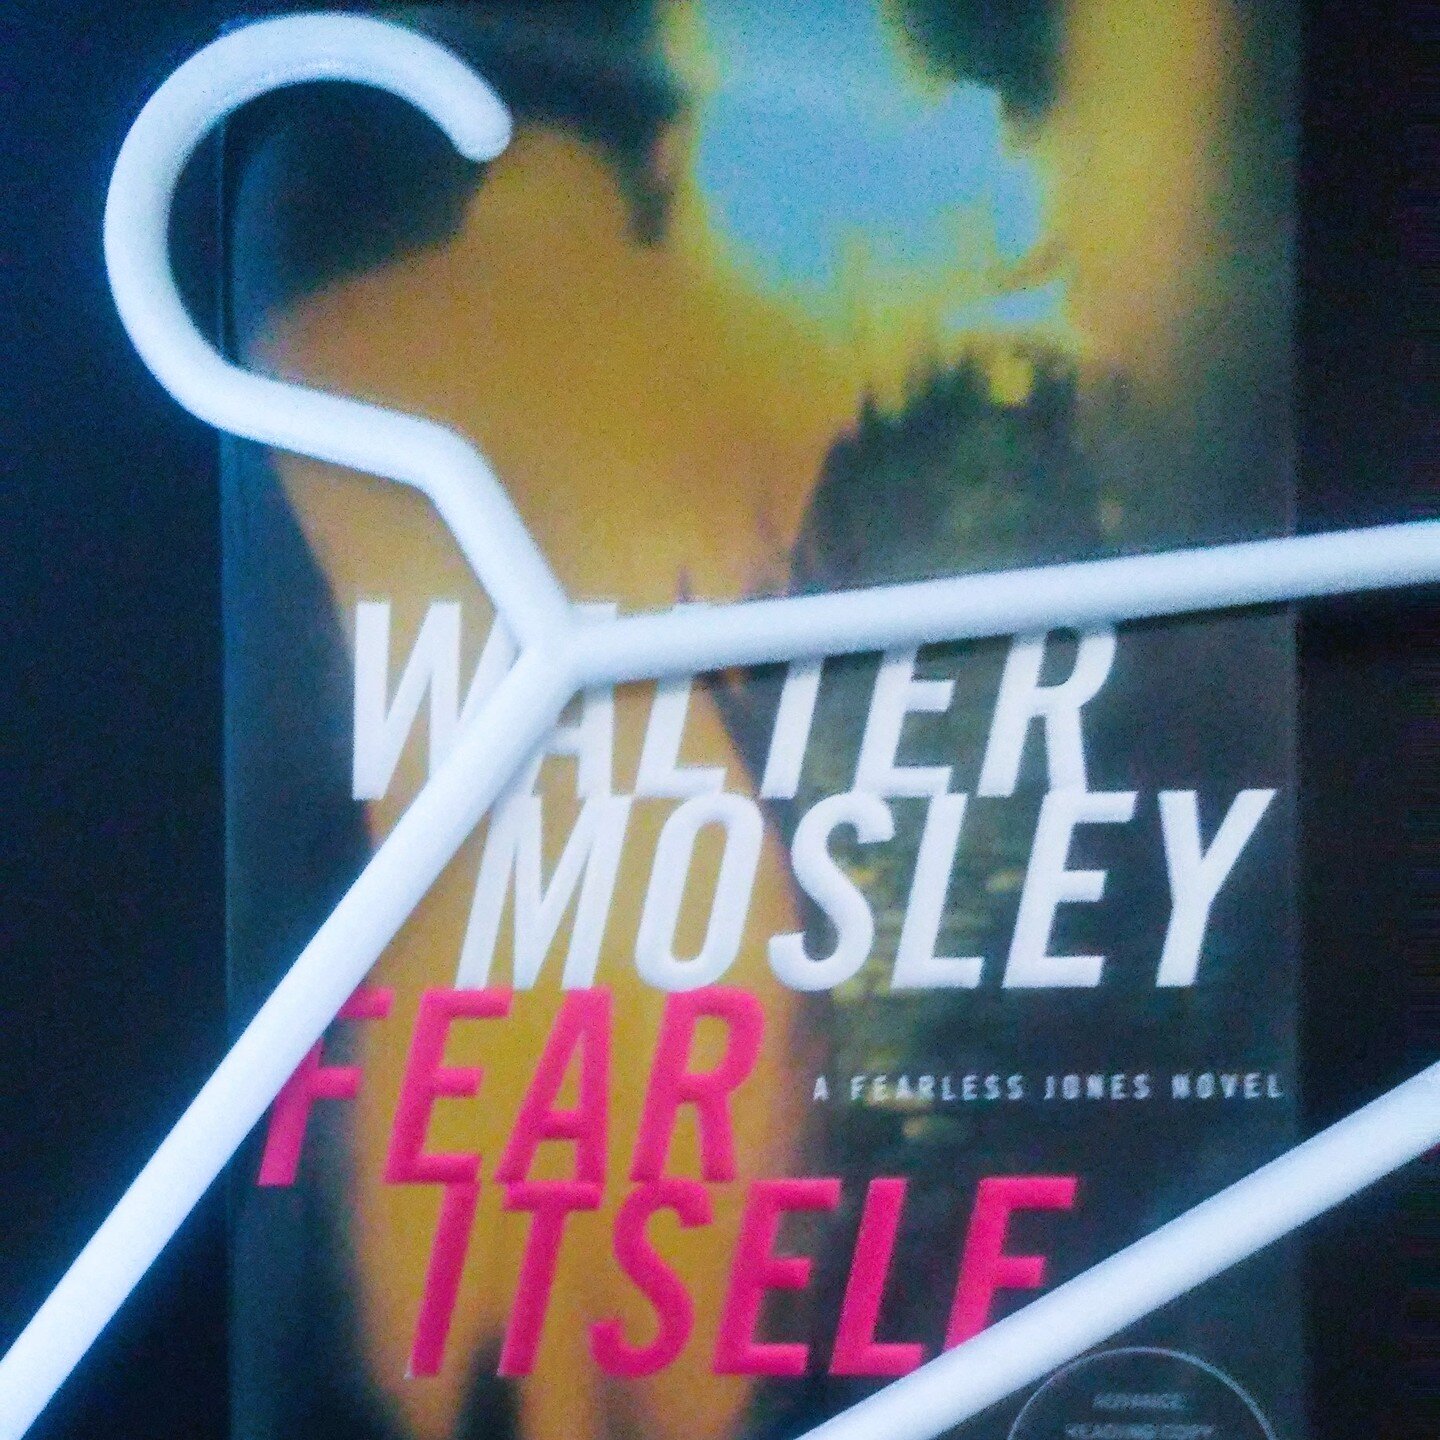 Fear Itself by Walter Mosley

&quot;You know neither one of us believes in coincidence, Milo.&quot;
&quot;Maybe not,&quot; he said. &quot;But if there's a word for it there's a chance that it's true.&quot;

#fearitself #waltermosley